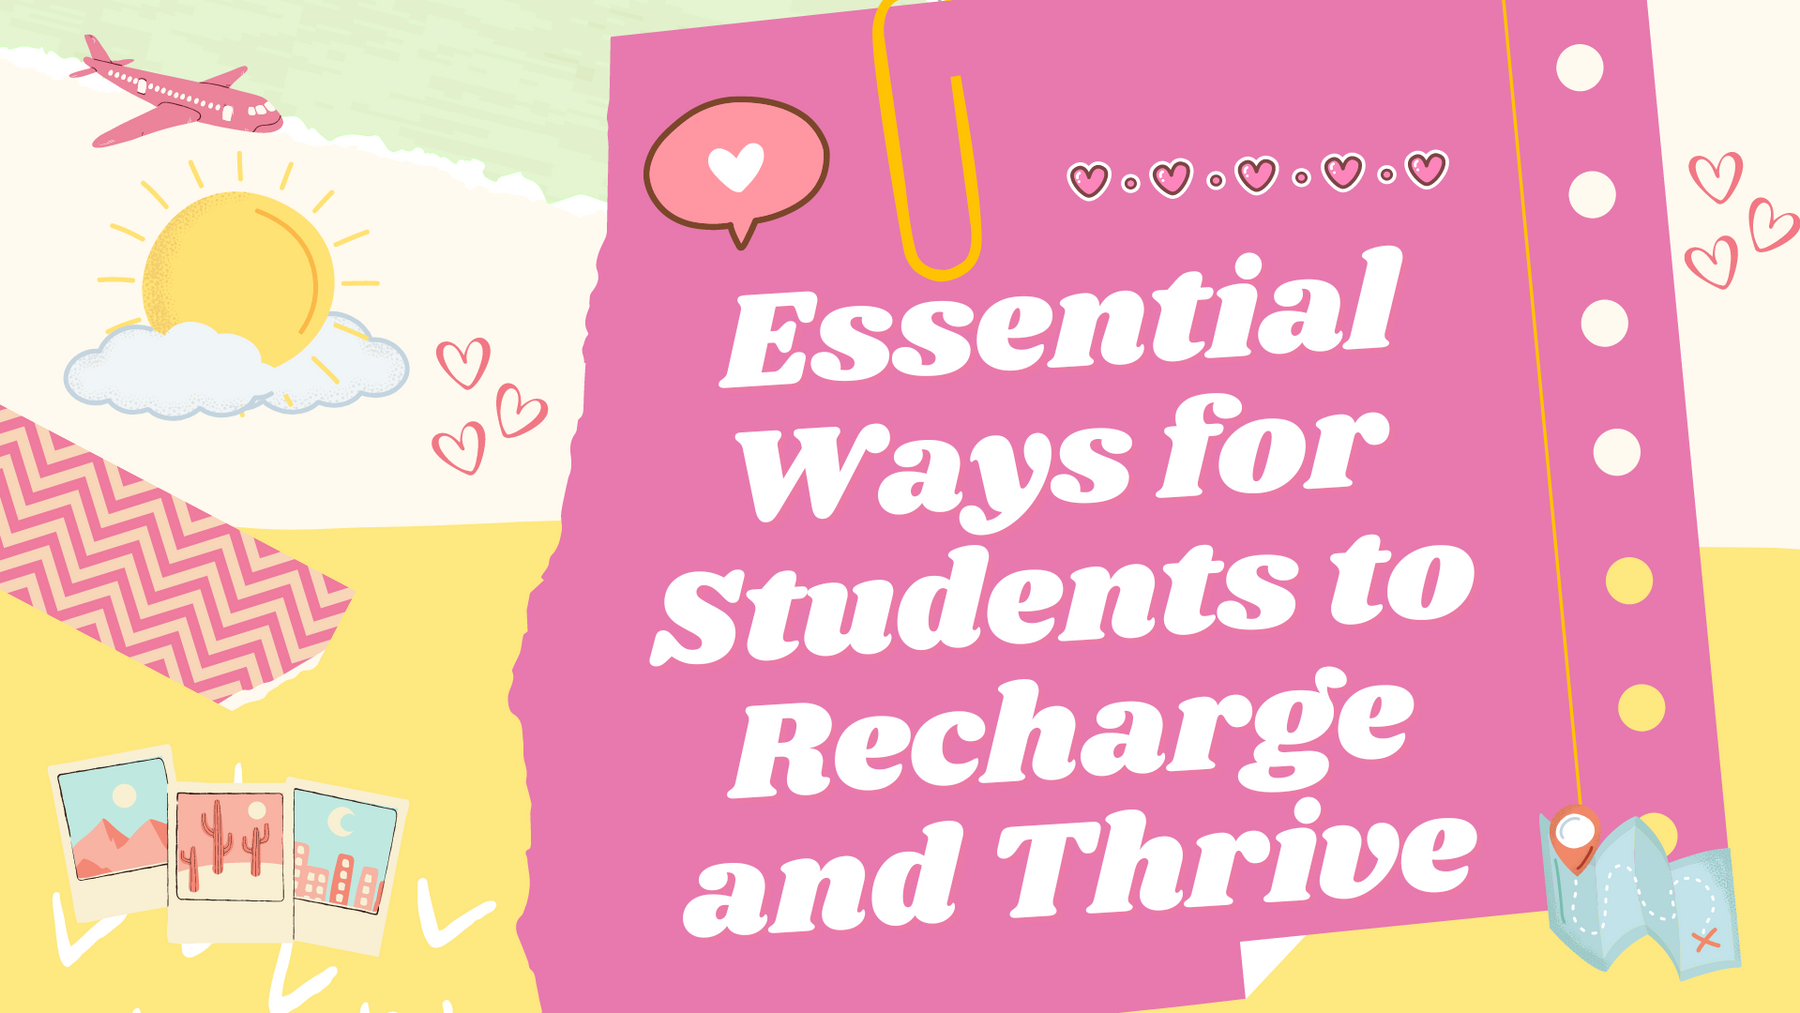 Essential Ways for Students to Recharge and Thrive